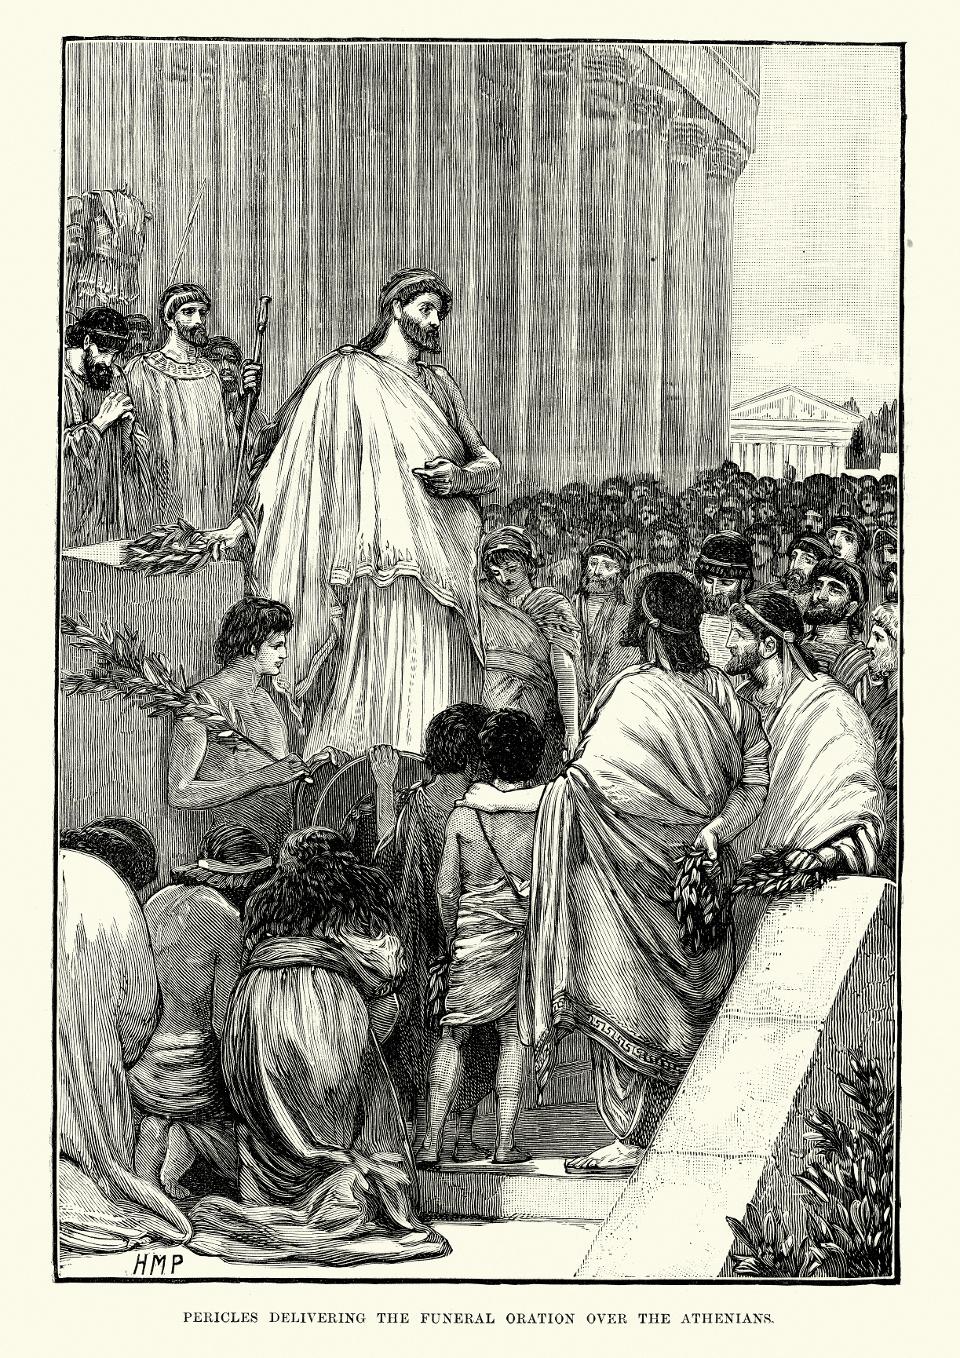 Pericles delivering the funeral oration over Athenians